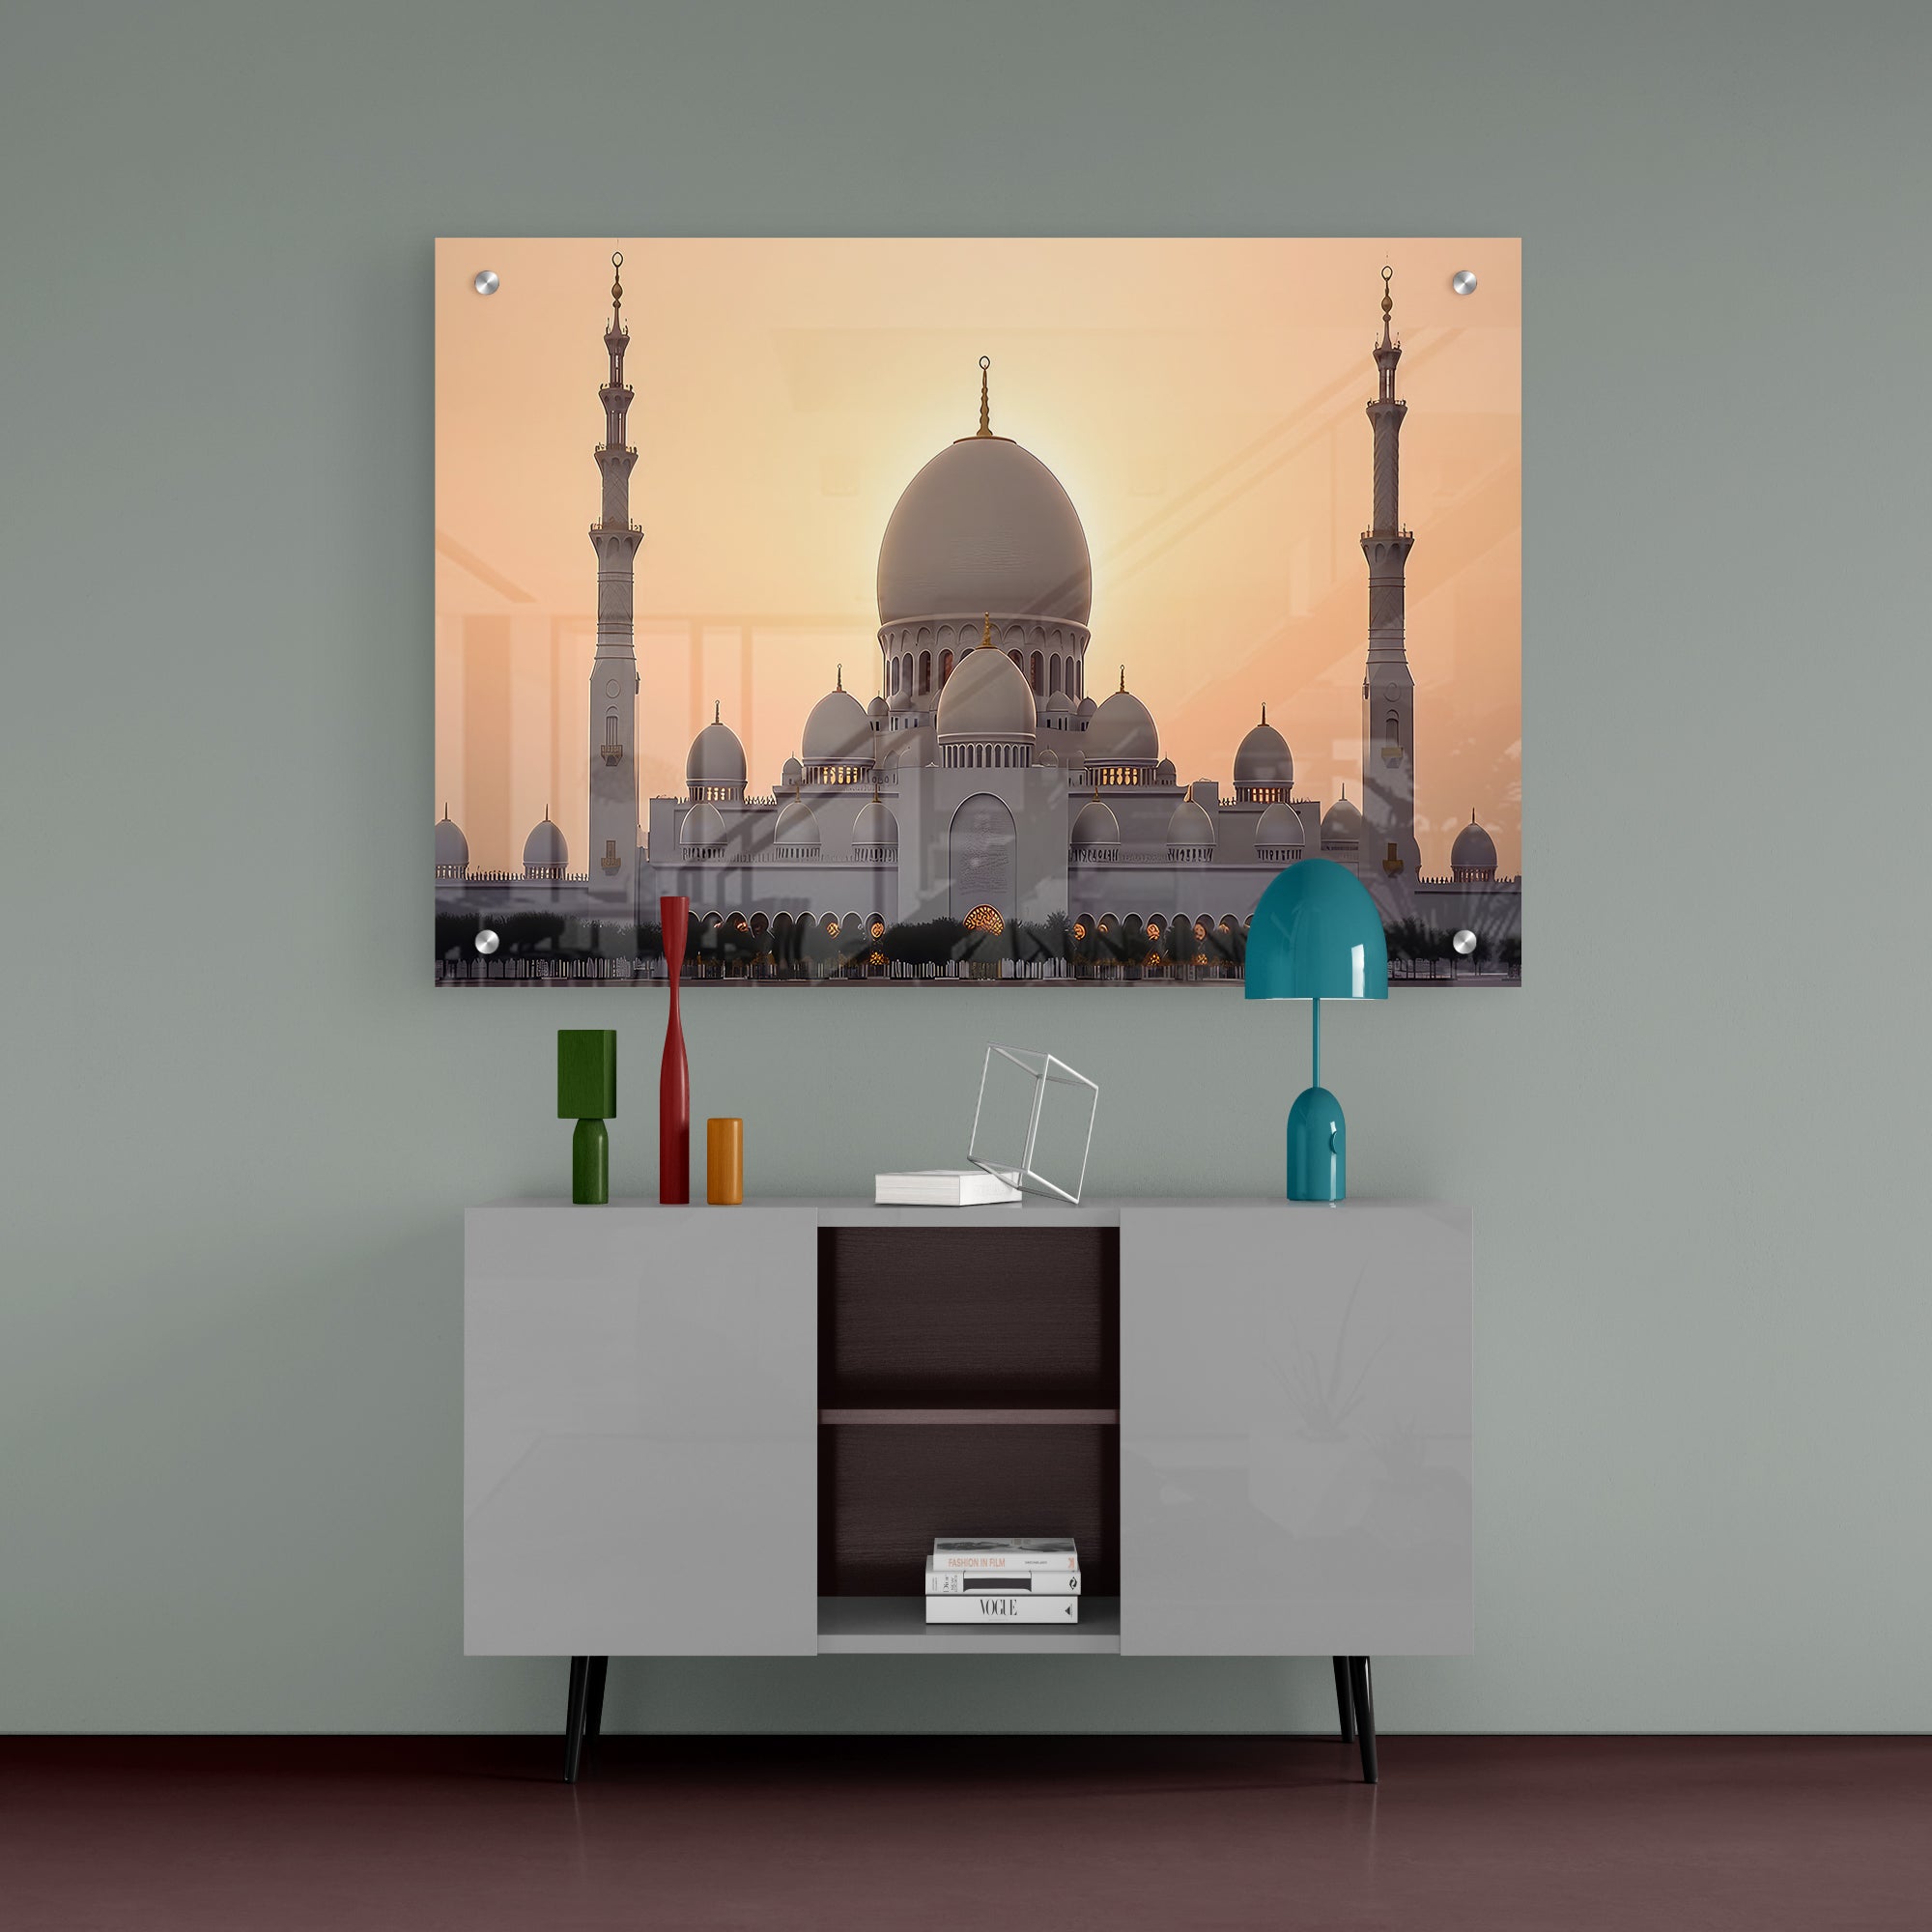 Mosque Abstract Art Acrylic Wall Painting